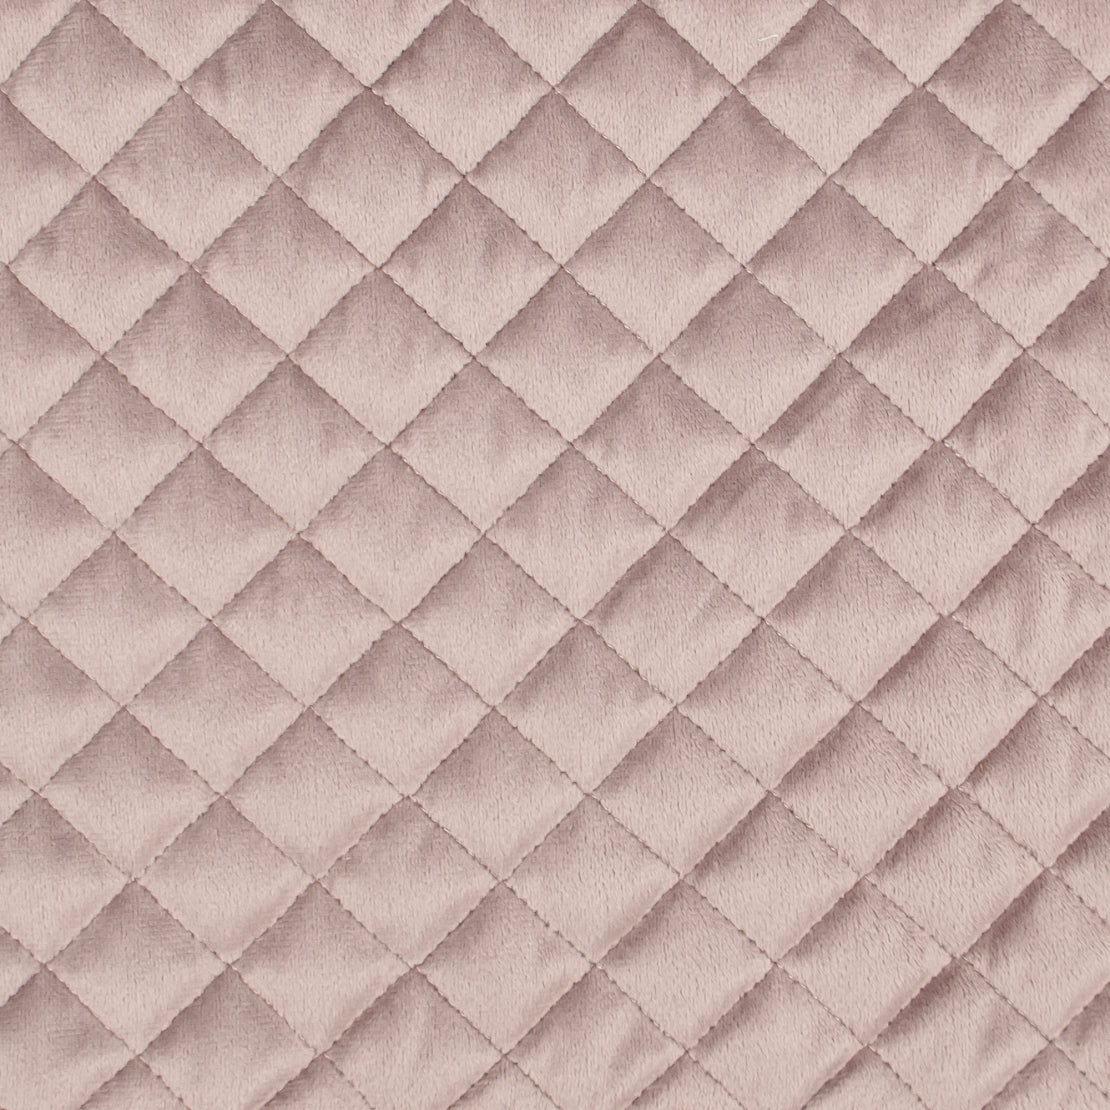 Quilted Fabric Yard